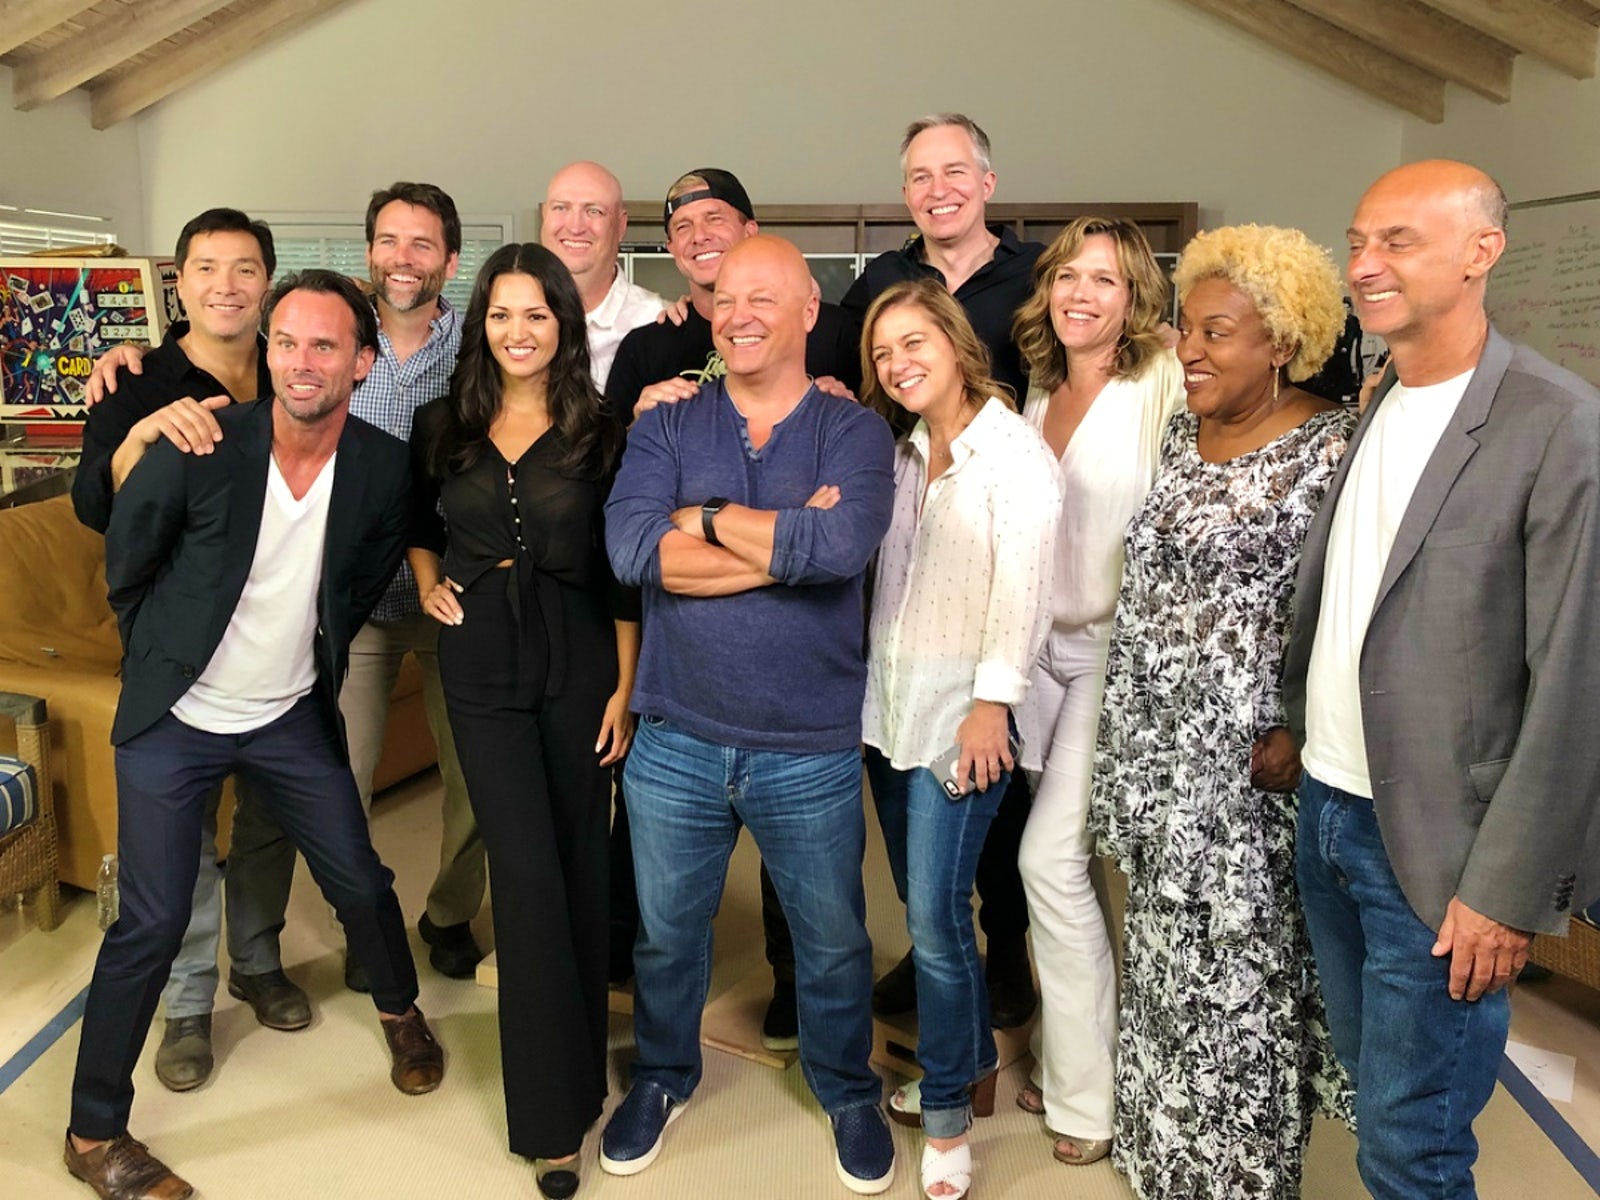 Michael Chiklis has reunion with 'The Shield' cast ...